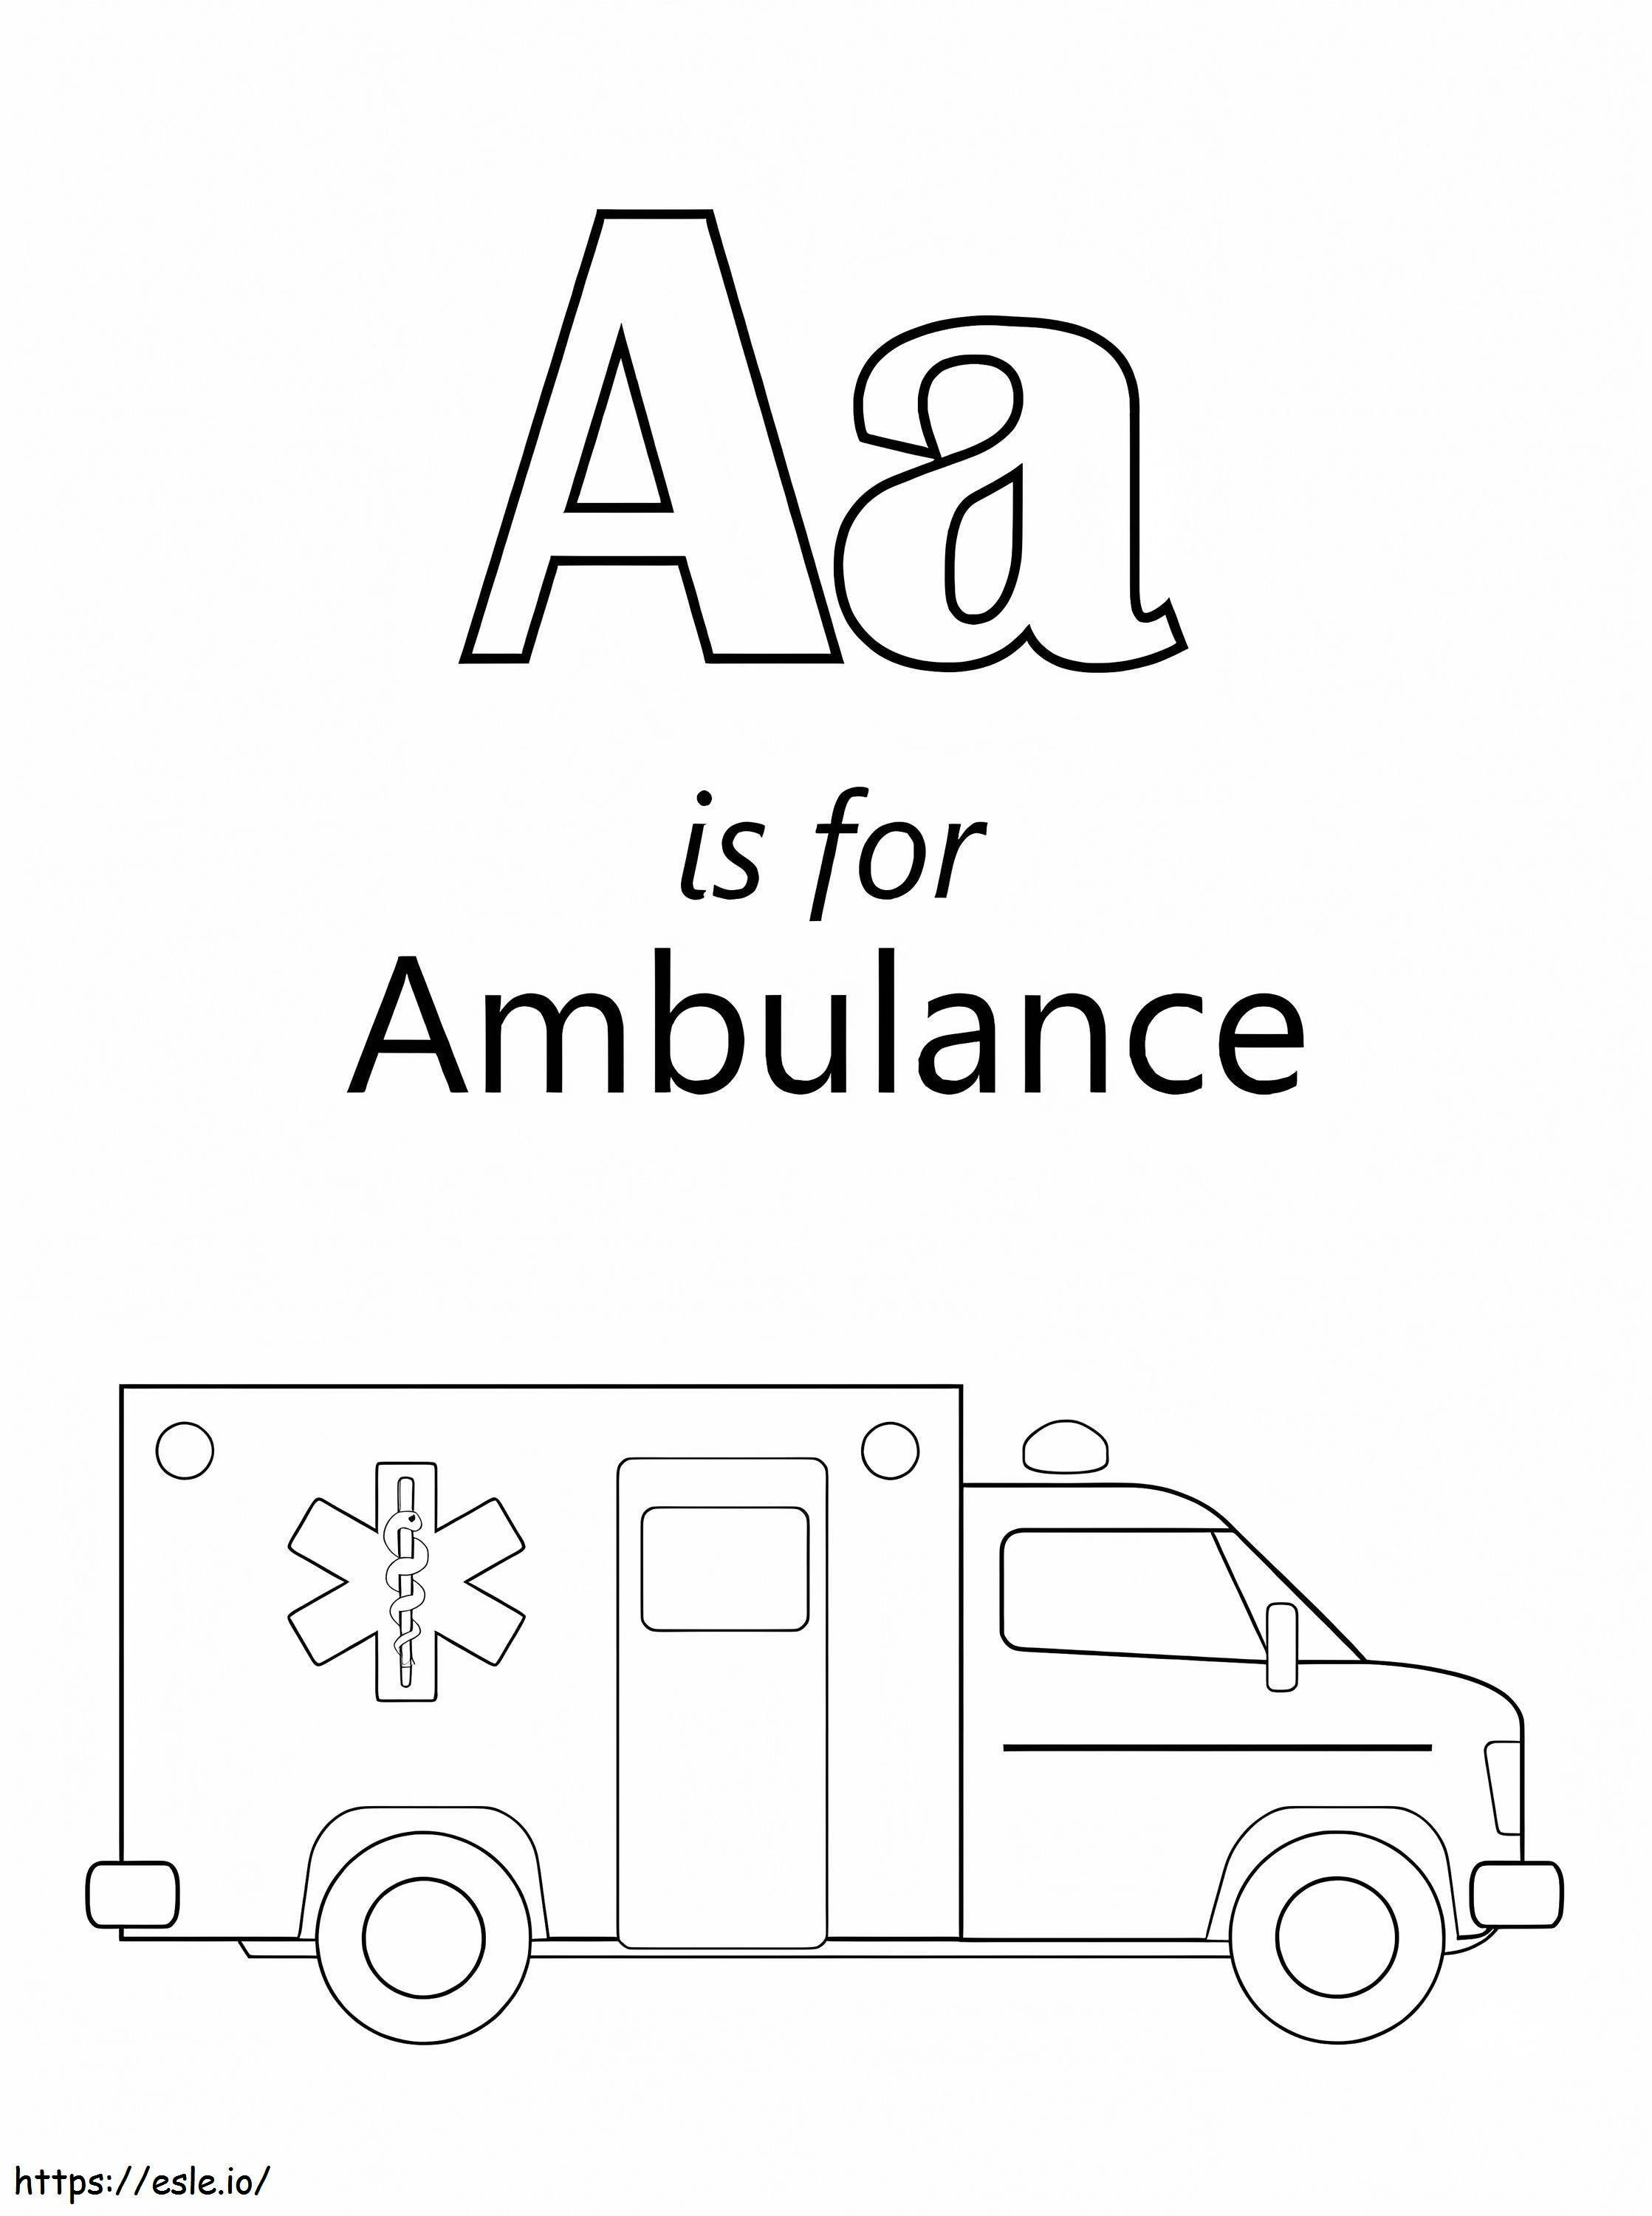 Ambulance Letter A 1 coloring page